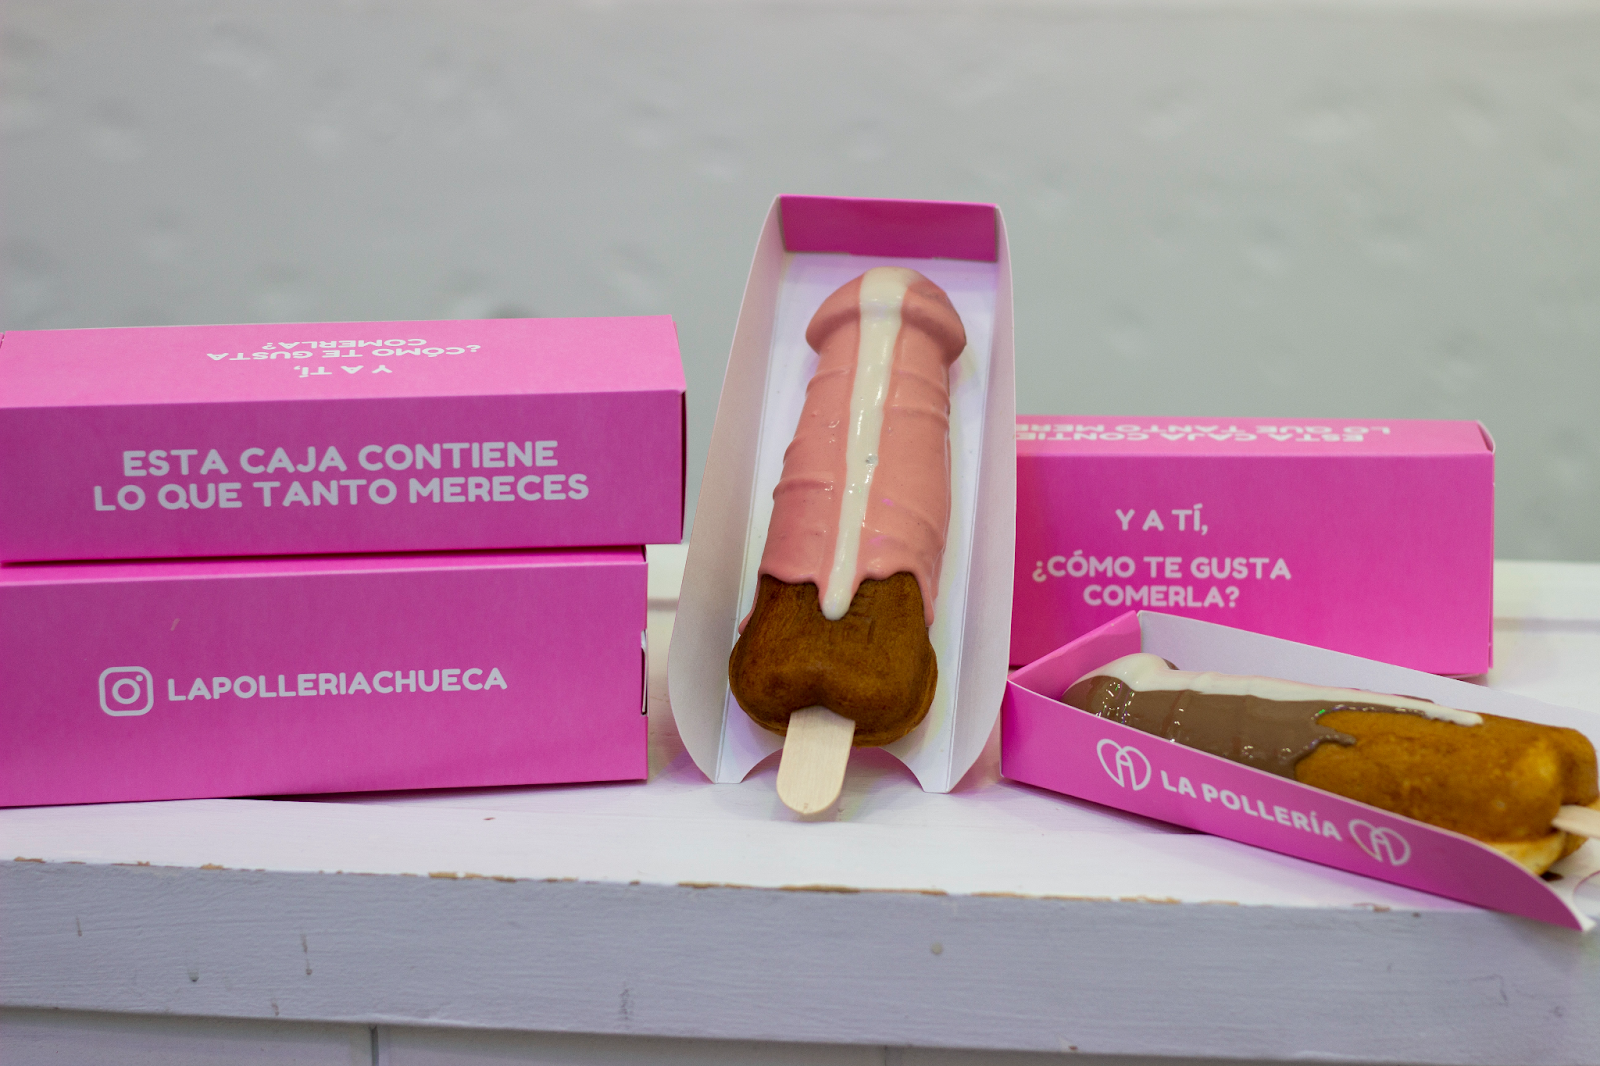 La Pollería is a very popular dessert shop in Madrid's Chueca neighborhod, serving penis-shaped ice cream on a stick. Its sister location is La Coñería.